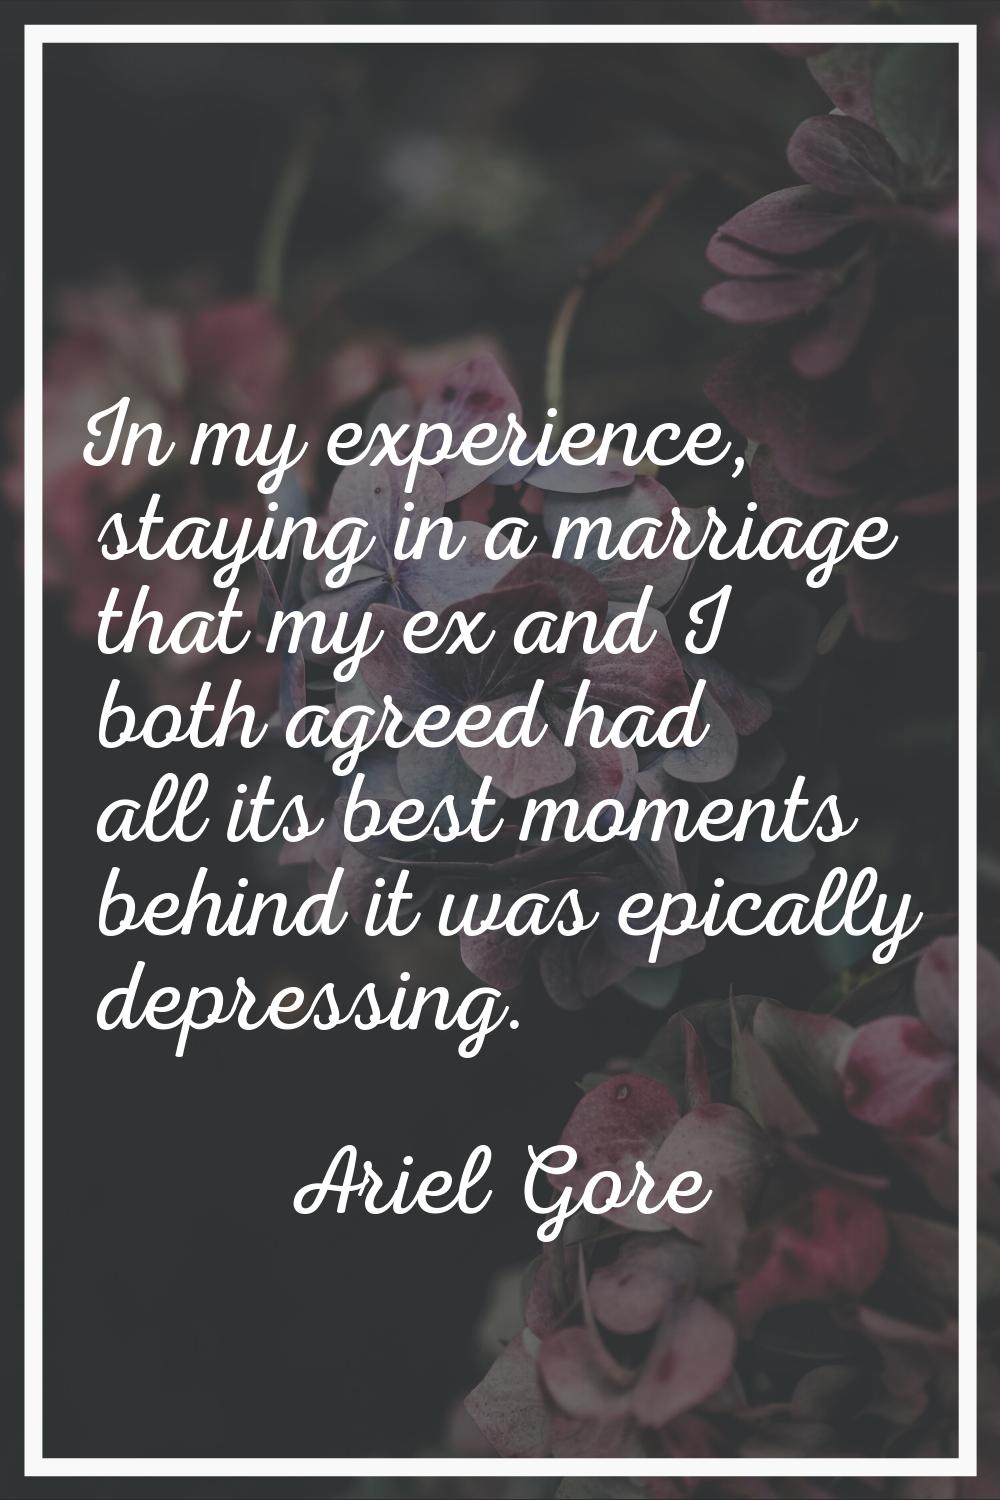 In my experience, staying in a marriage that my ex and I both agreed had all its best moments behin